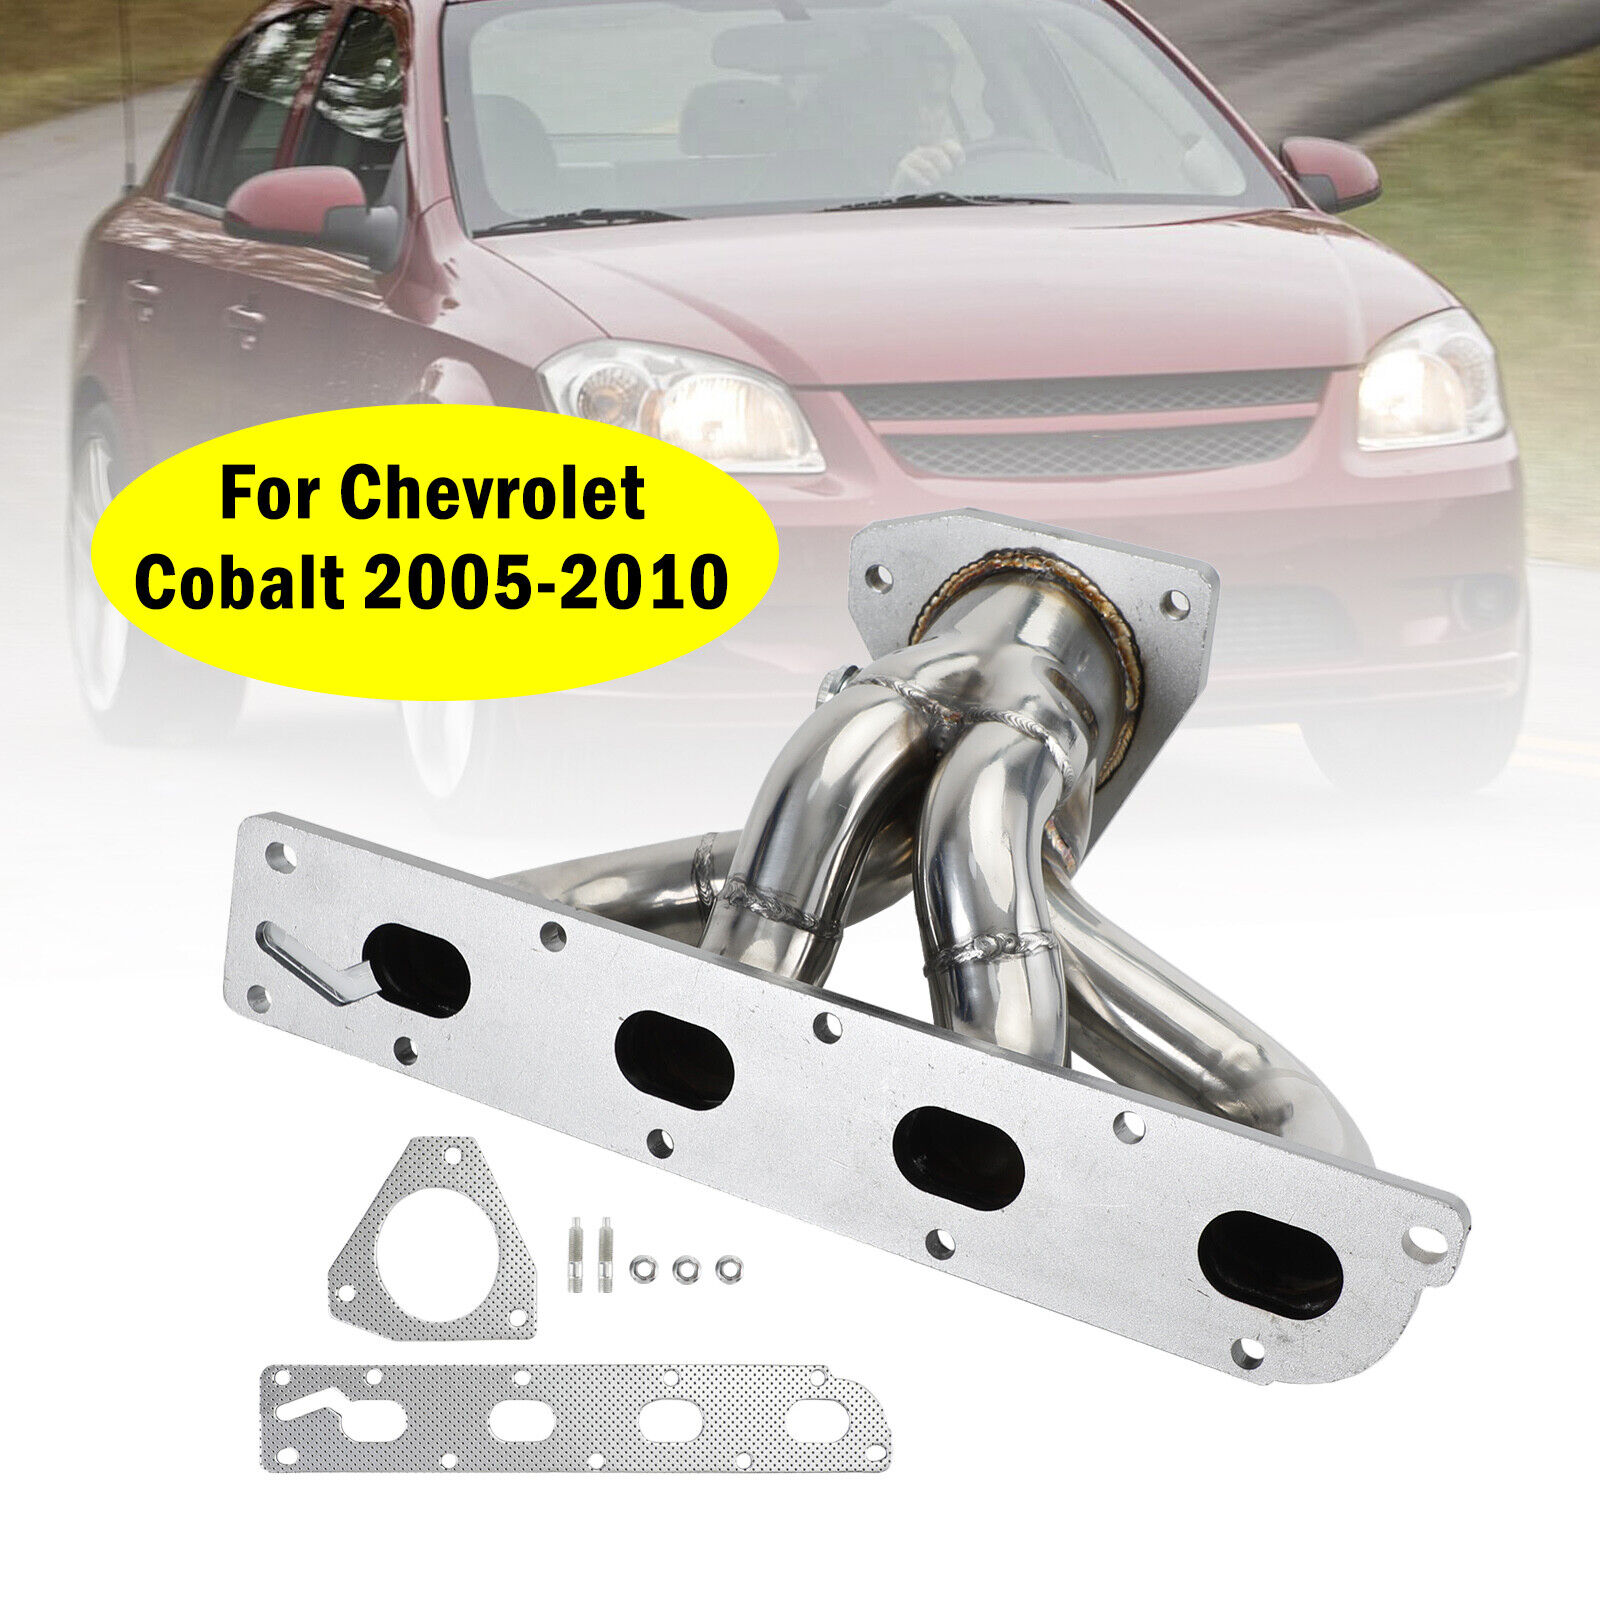 1× Stainless Exhaust Header Kit For Chevy Cobalt / HHR & Saturn Ion-1 / Ion-2 US